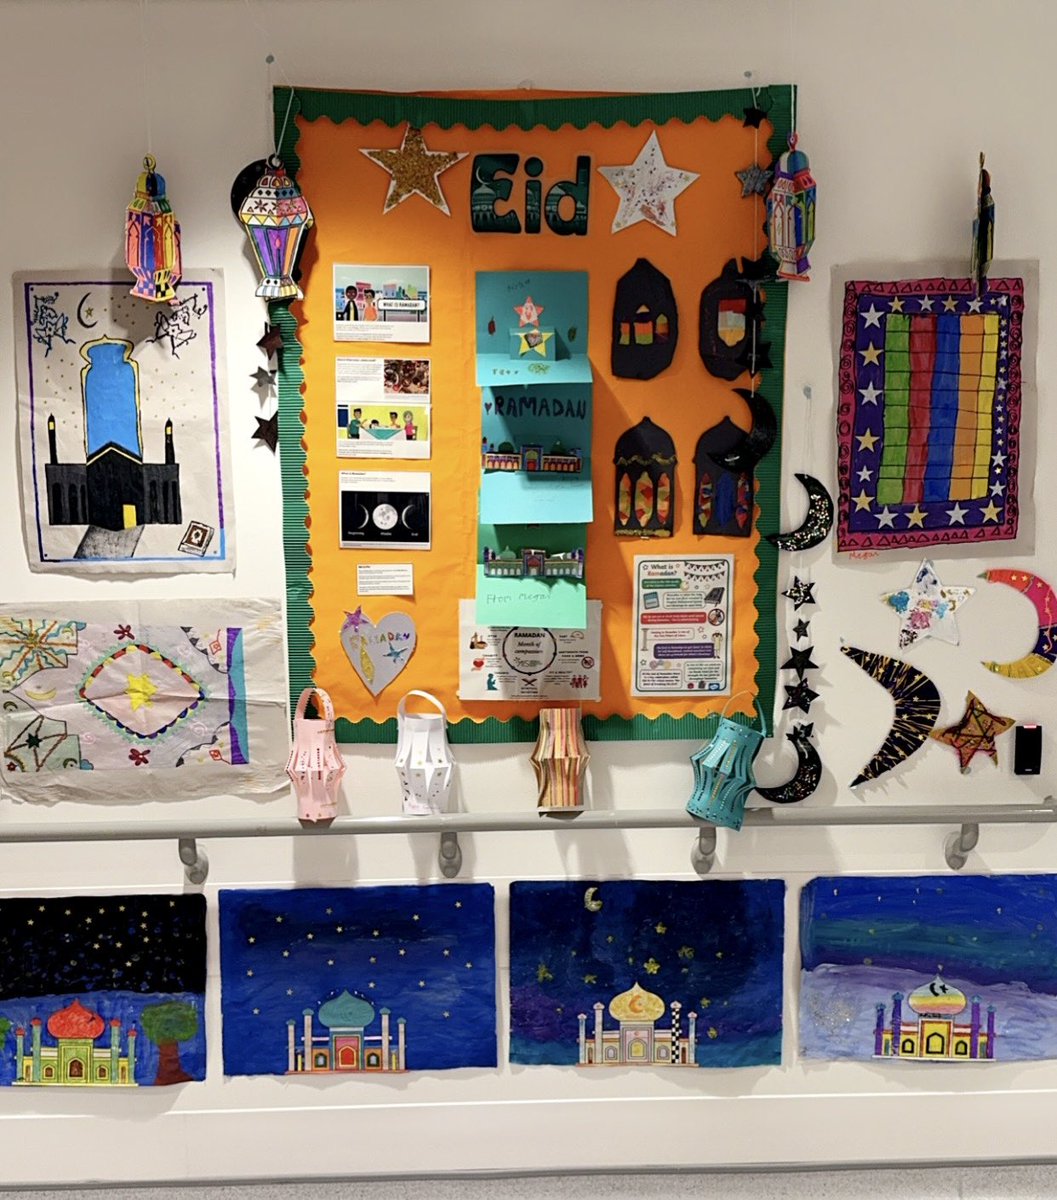 Wonderful arts and crafts pieces about Ramadan and Eid. Ramadan is the 9th holy month in the Islamic calendar and is a time of prayer, reflection and fasting where you withhold food and drink from sunrise to sunset, yes not even water! @NewhamHospital @KathEvans2 @BakahJosephine